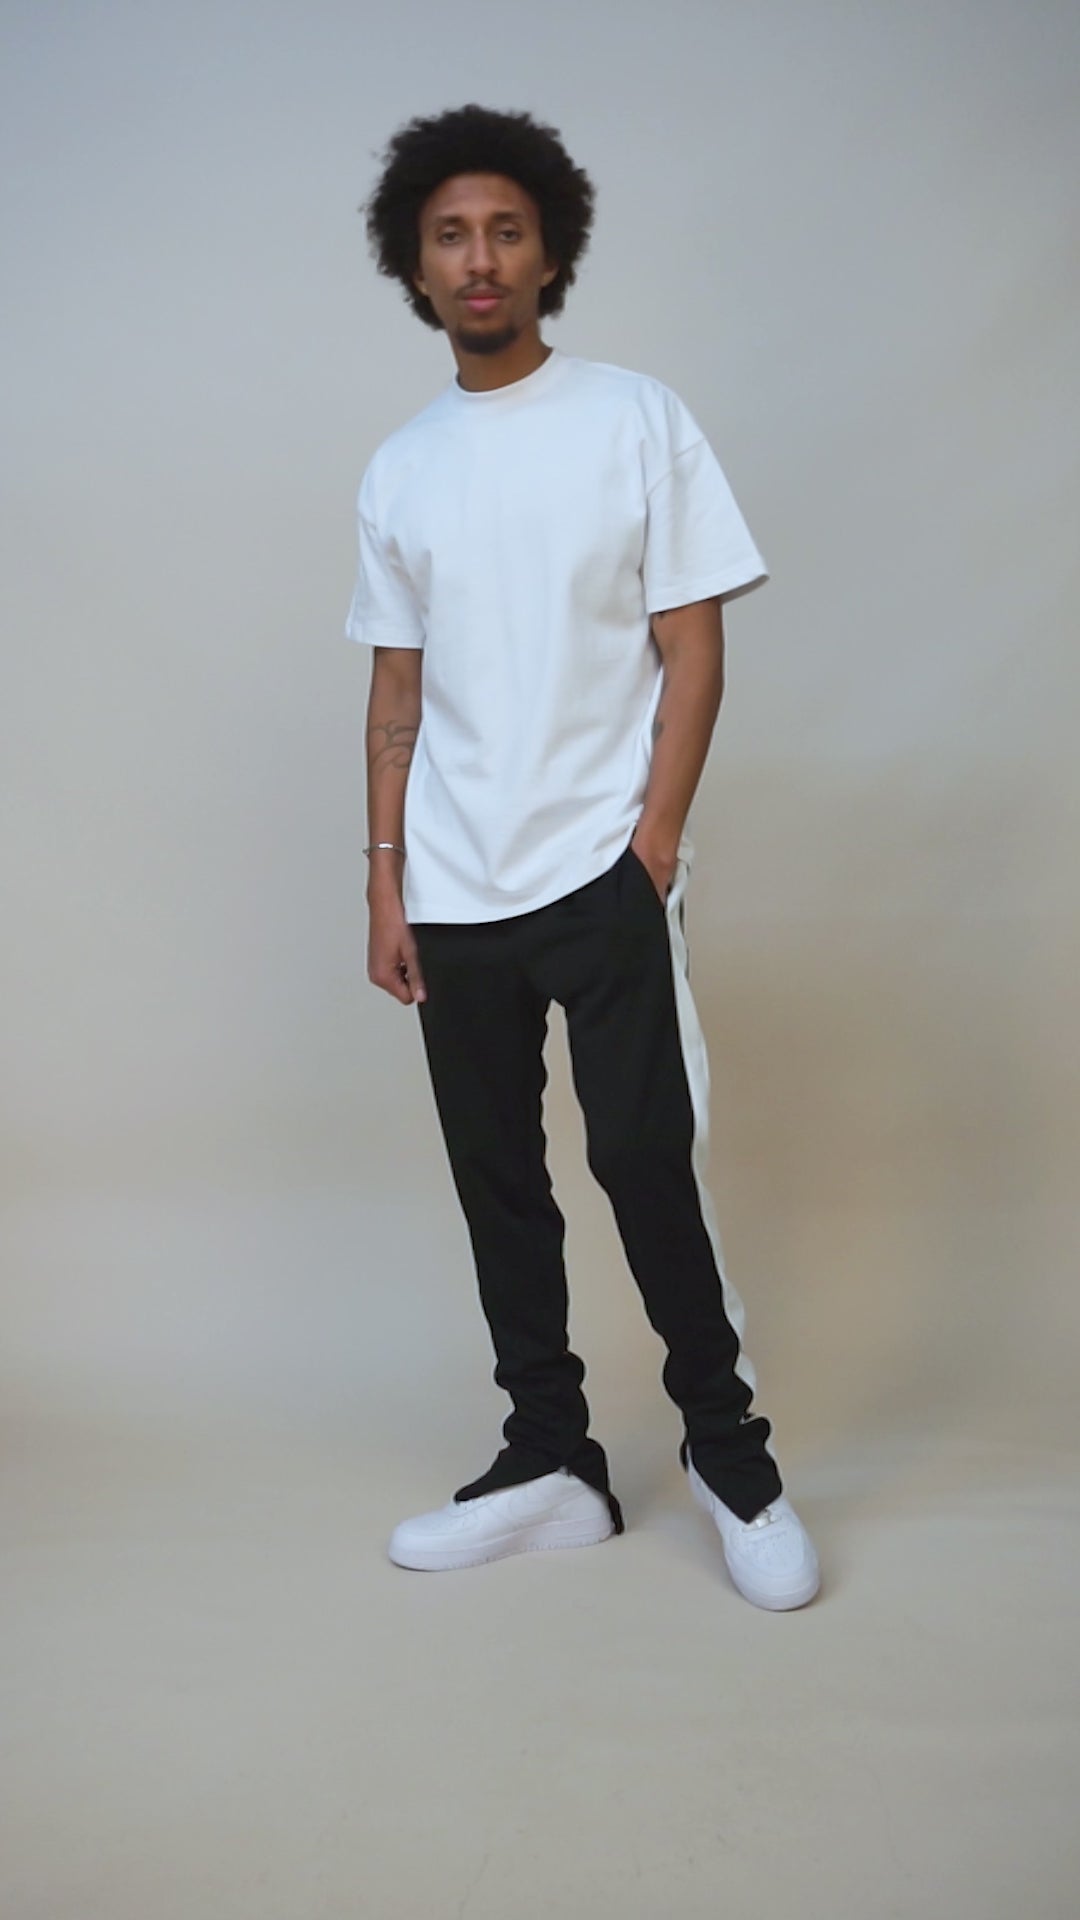 PE Track Pants Black/White (Optional) - Embroidered with Staindrop